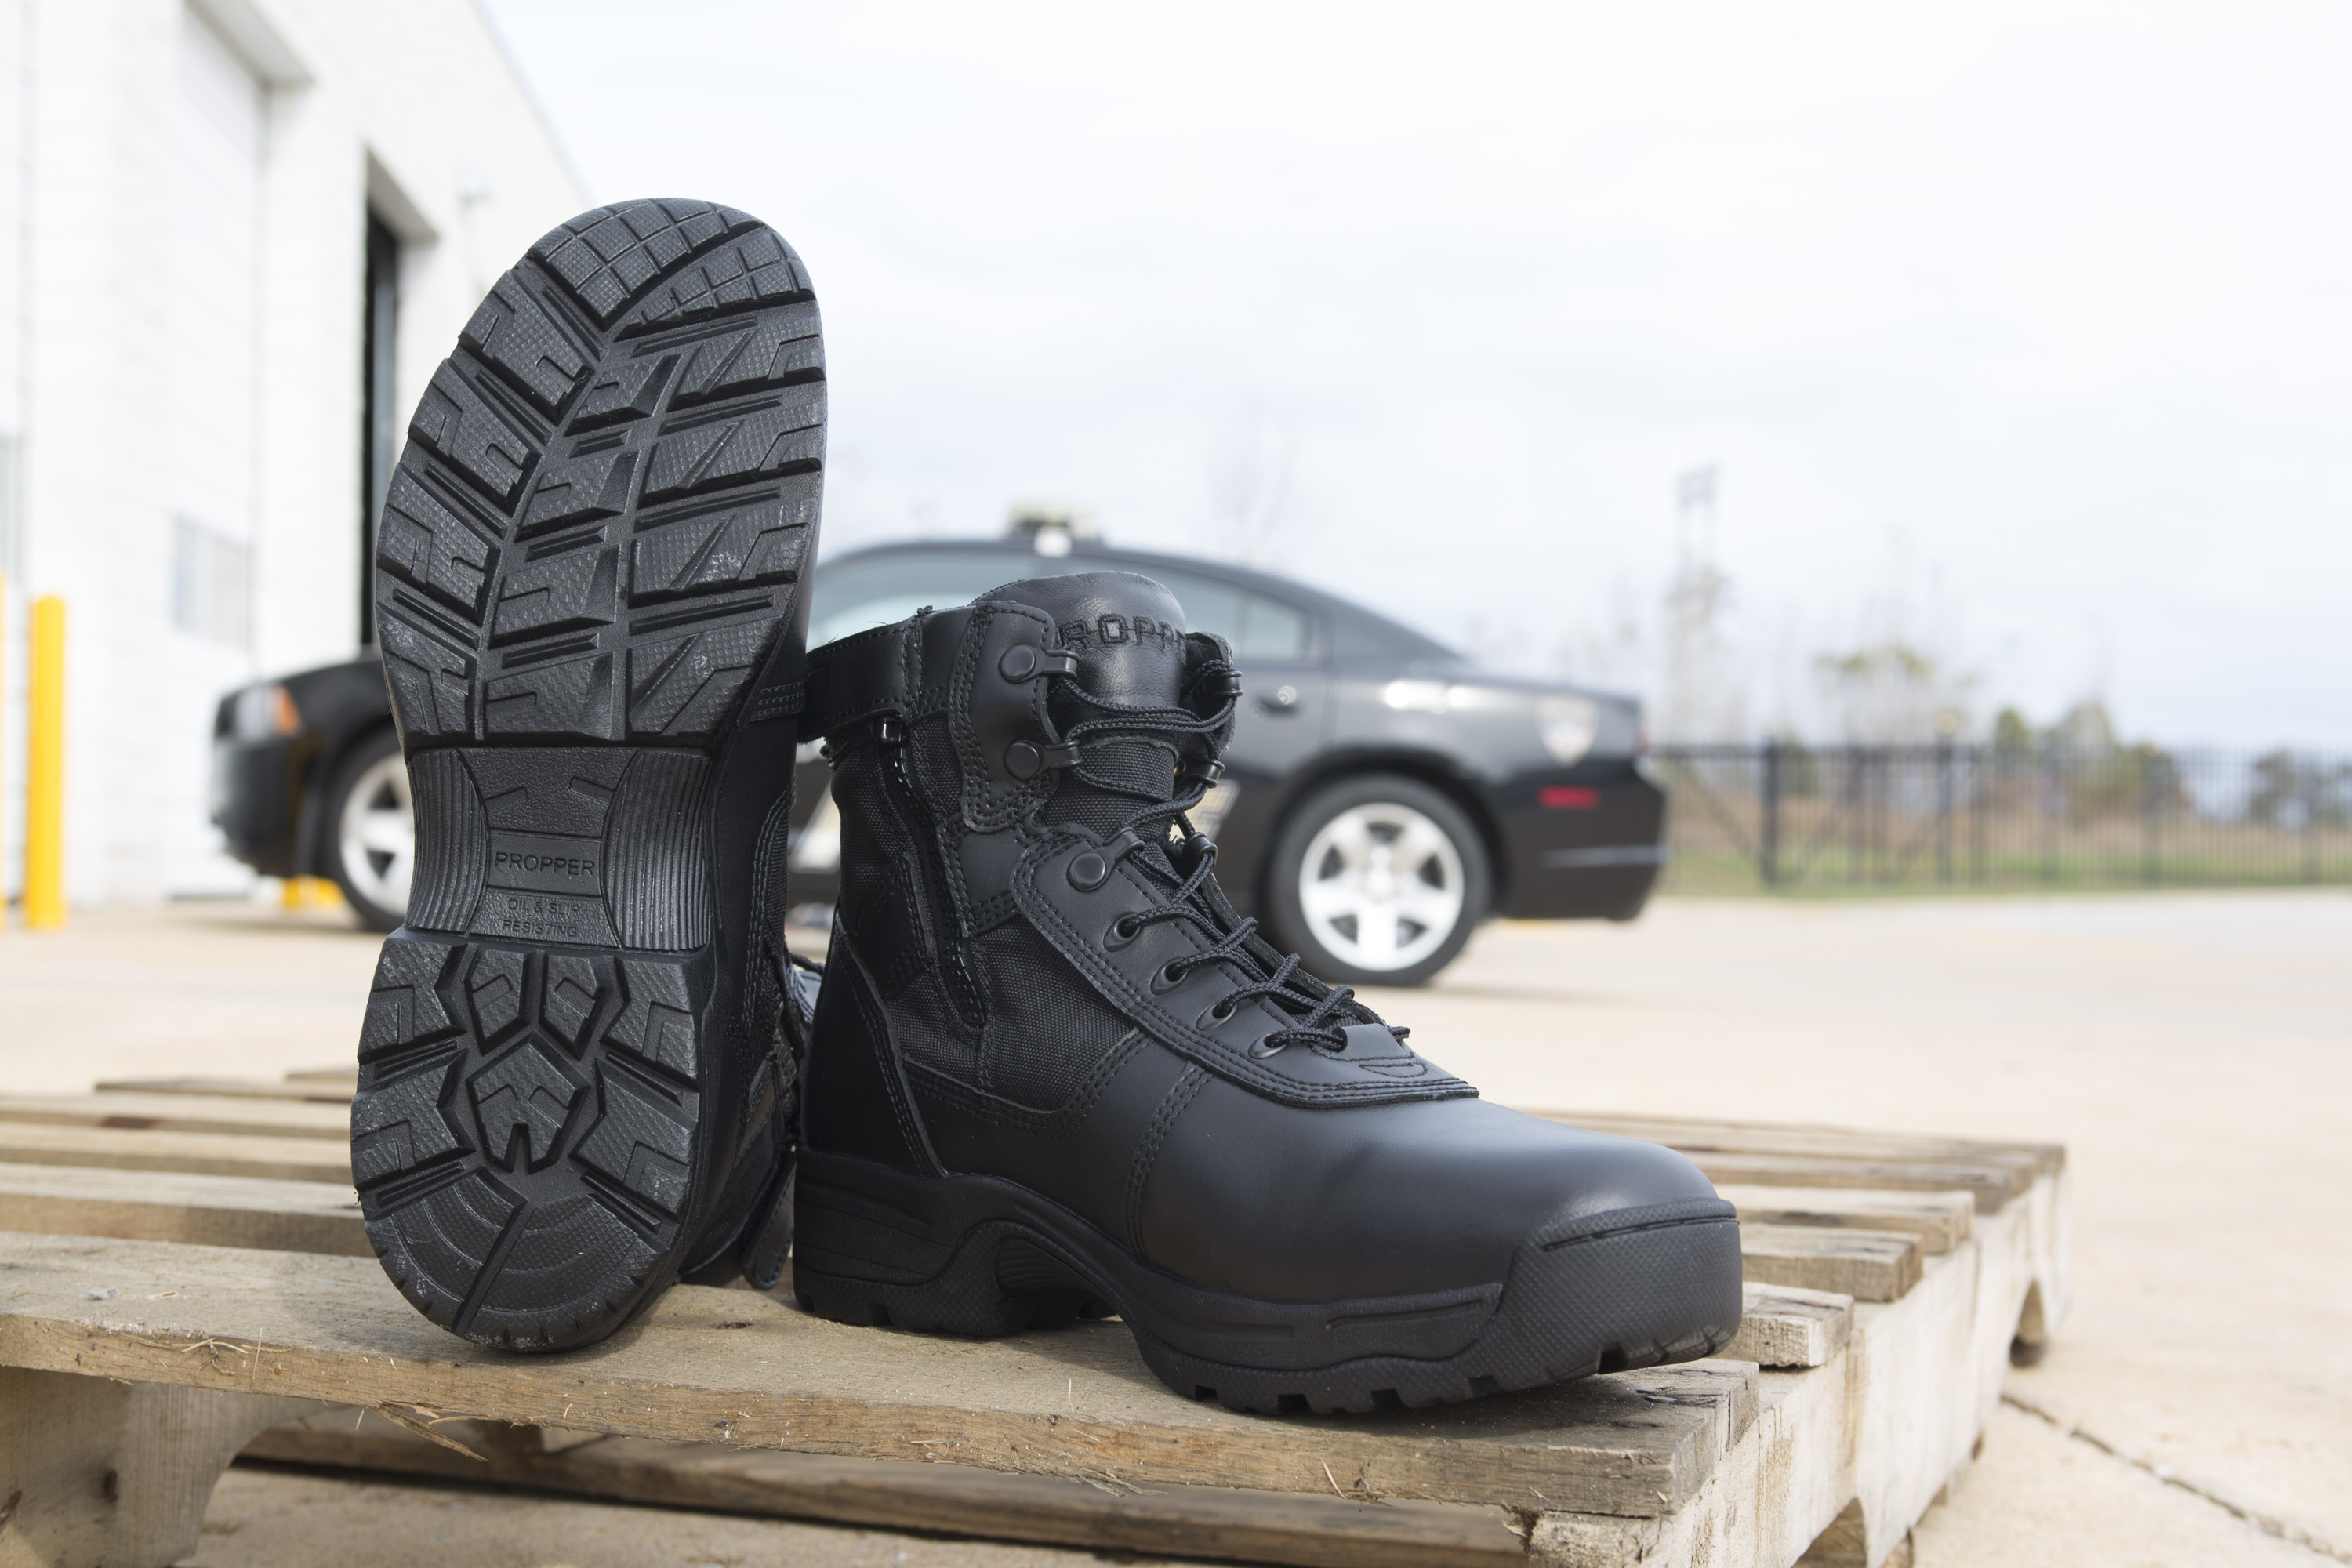 The new Waterproof Series 100 leather boots are available in both 6-inch and 8-inch versions with a 1000D Cordura® upper that can be pulled snug with the quick and easy NATO speed lace system.